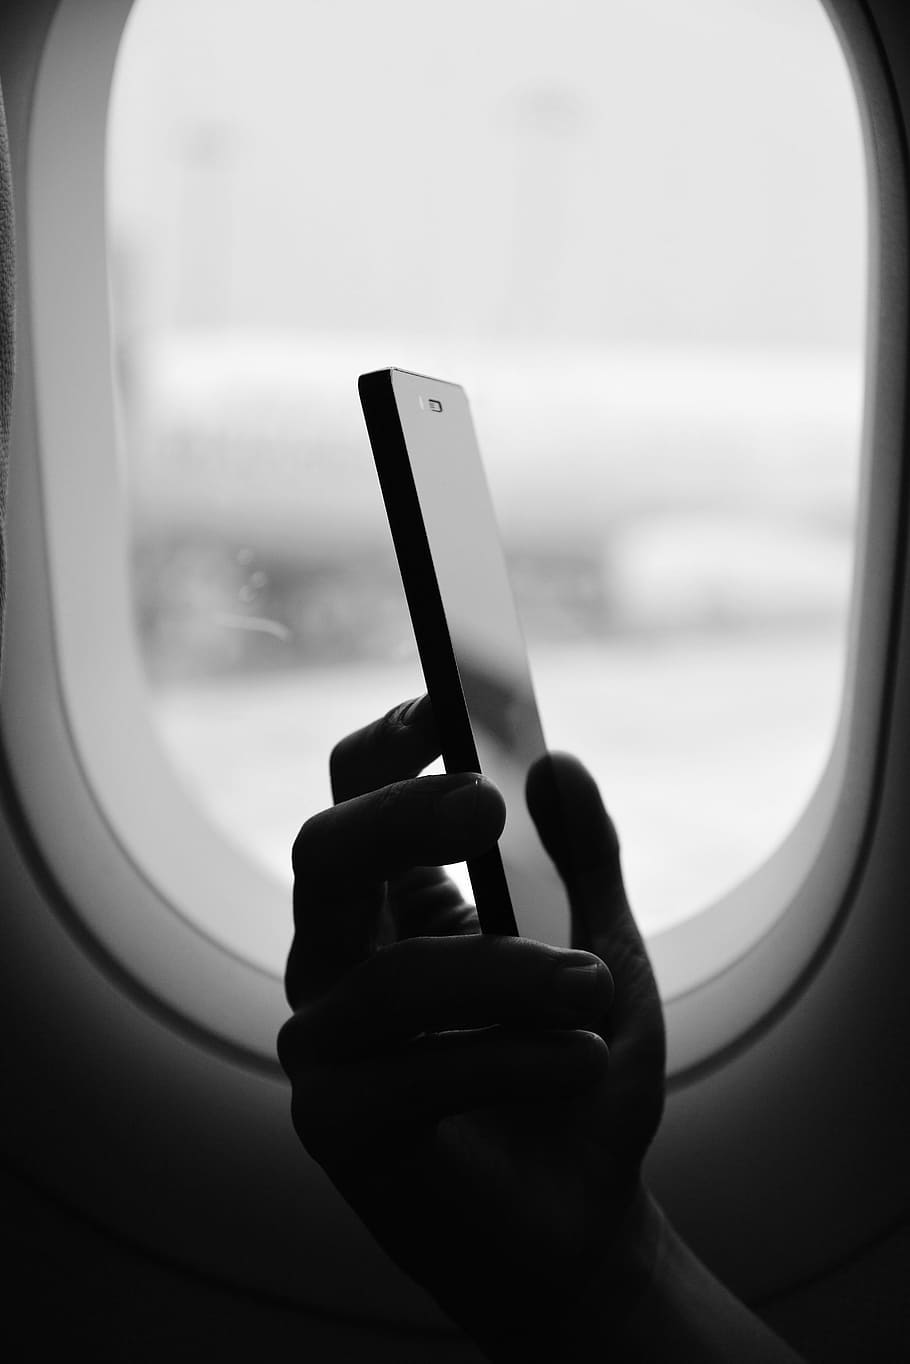 grayscale photography of person holding smartphone beside window, person sitting near airliner window while holding smartphone